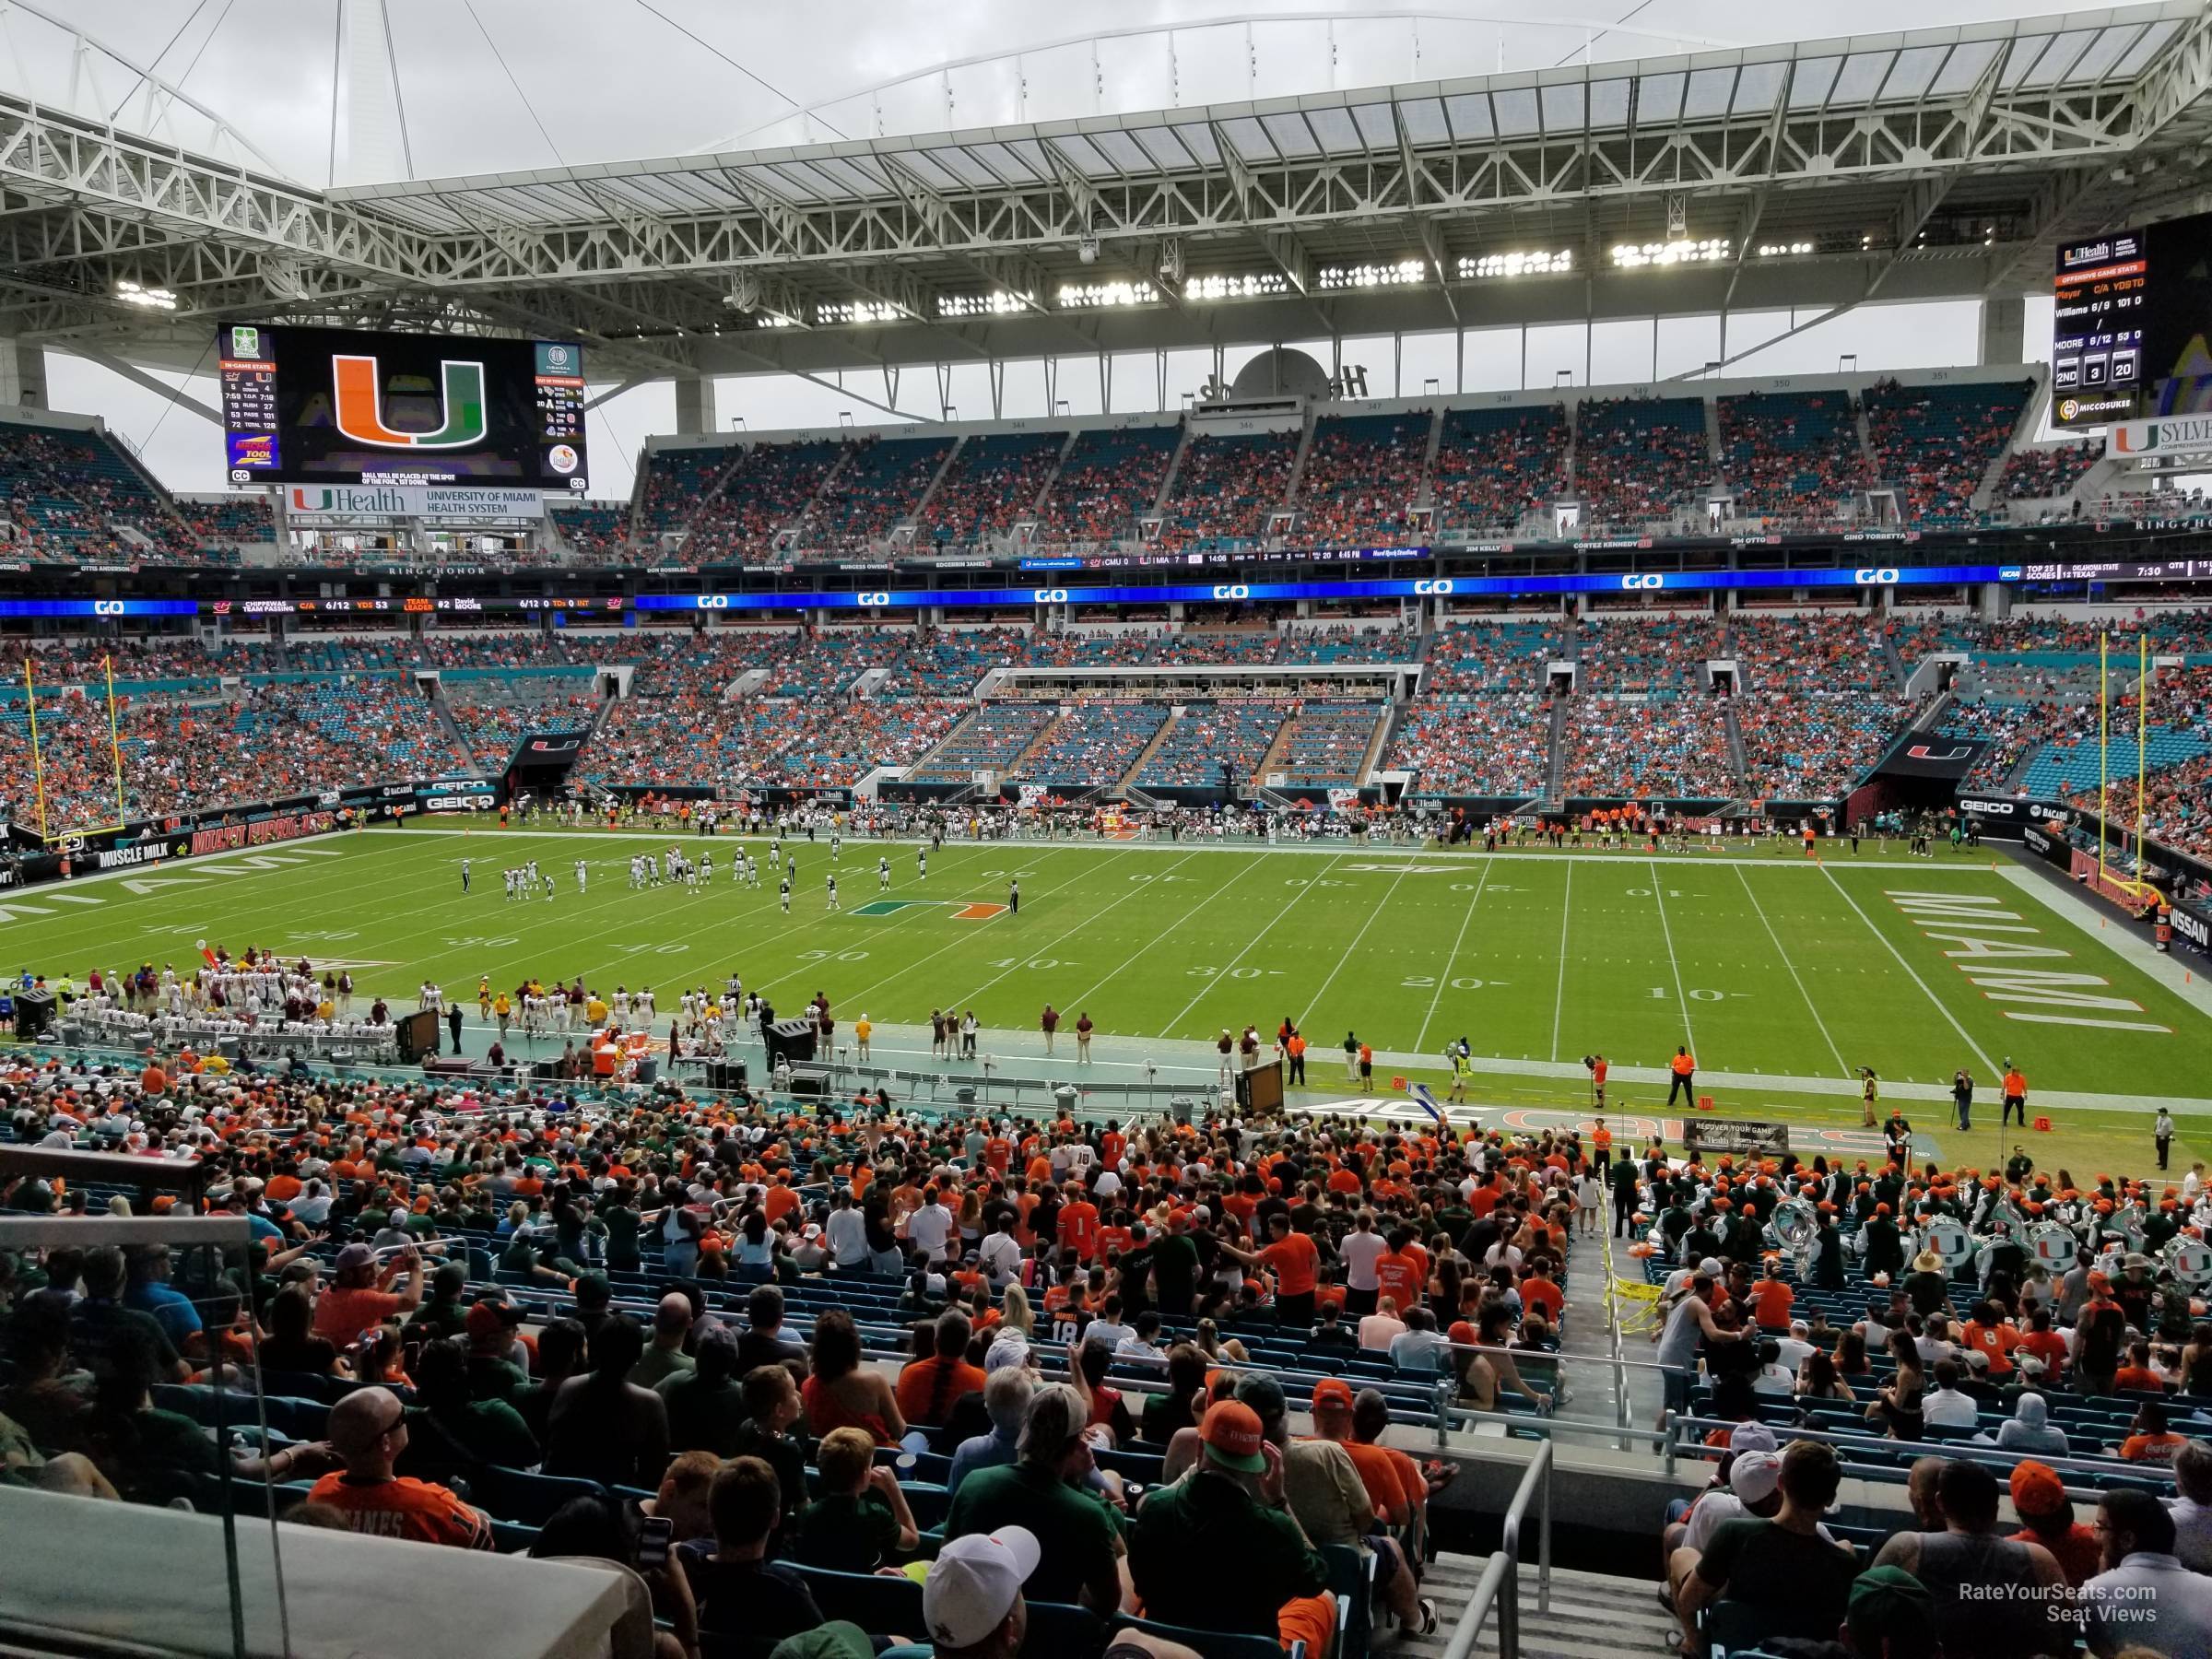 section 215, row 10 seat view  for football - hard rock stadium